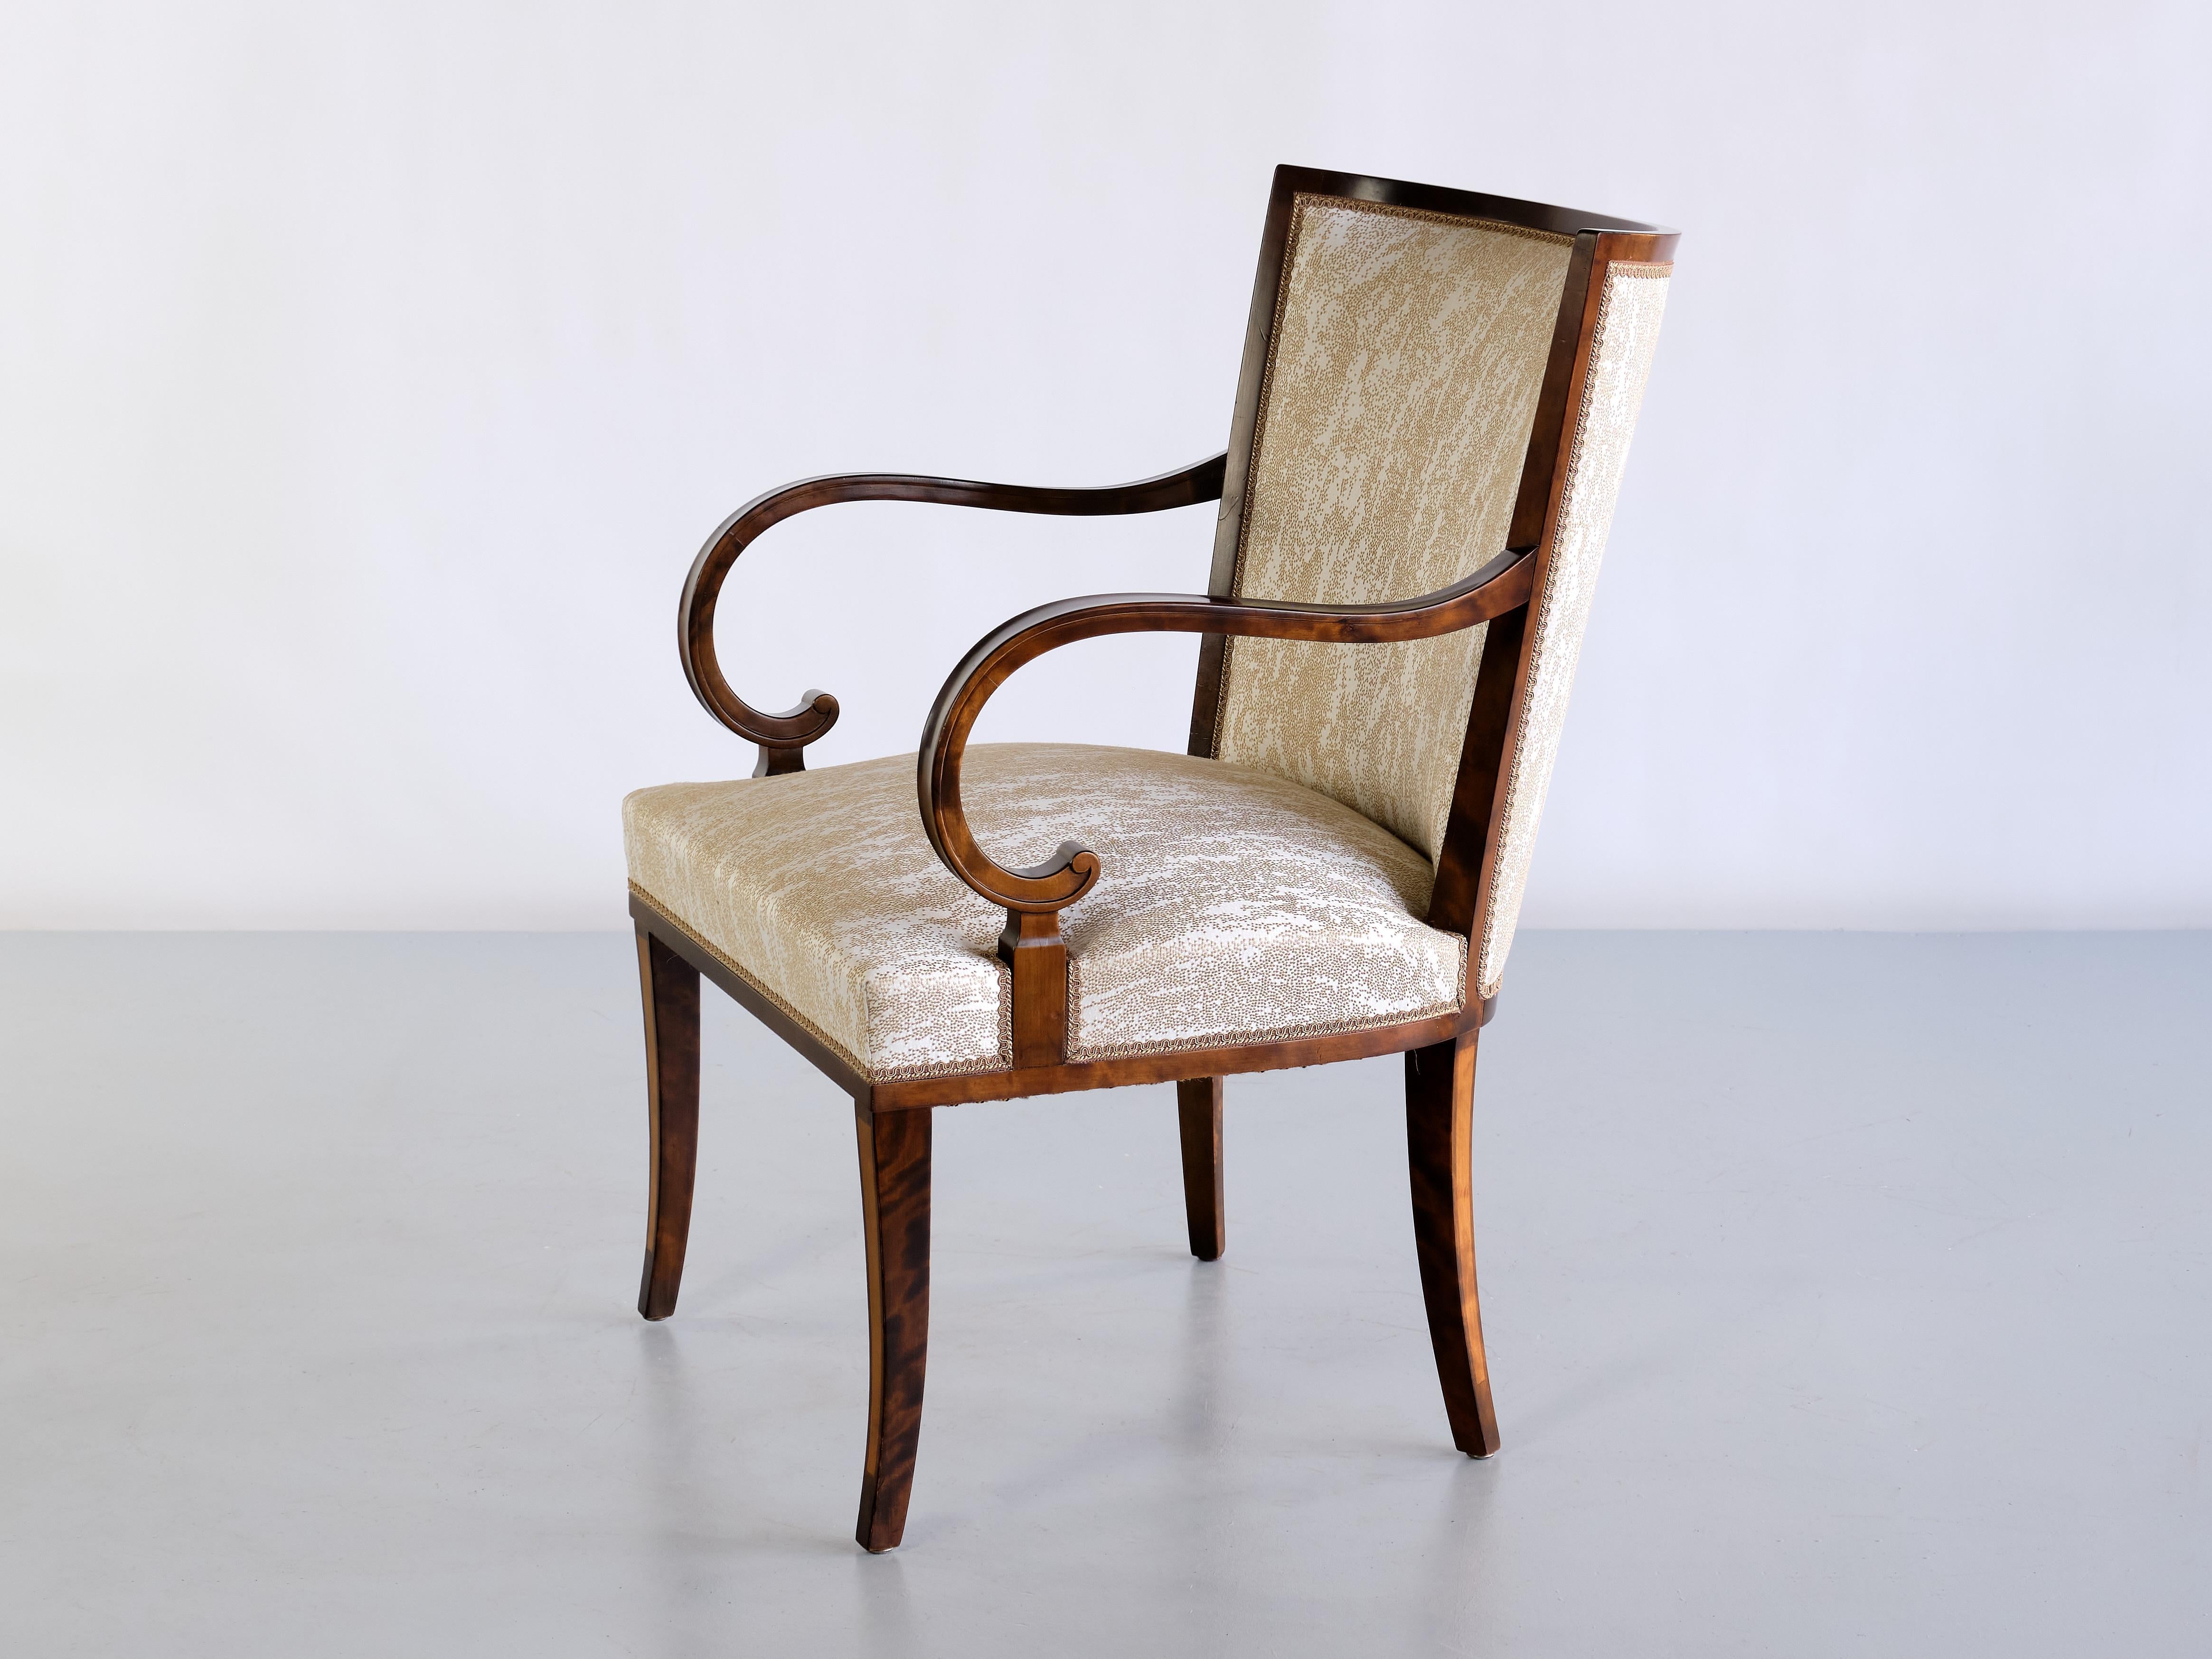 Pair of Carl Malmsten Armchairs in Birch and Satinwood, Bodafors, Sweden, 1930s For Sale 6